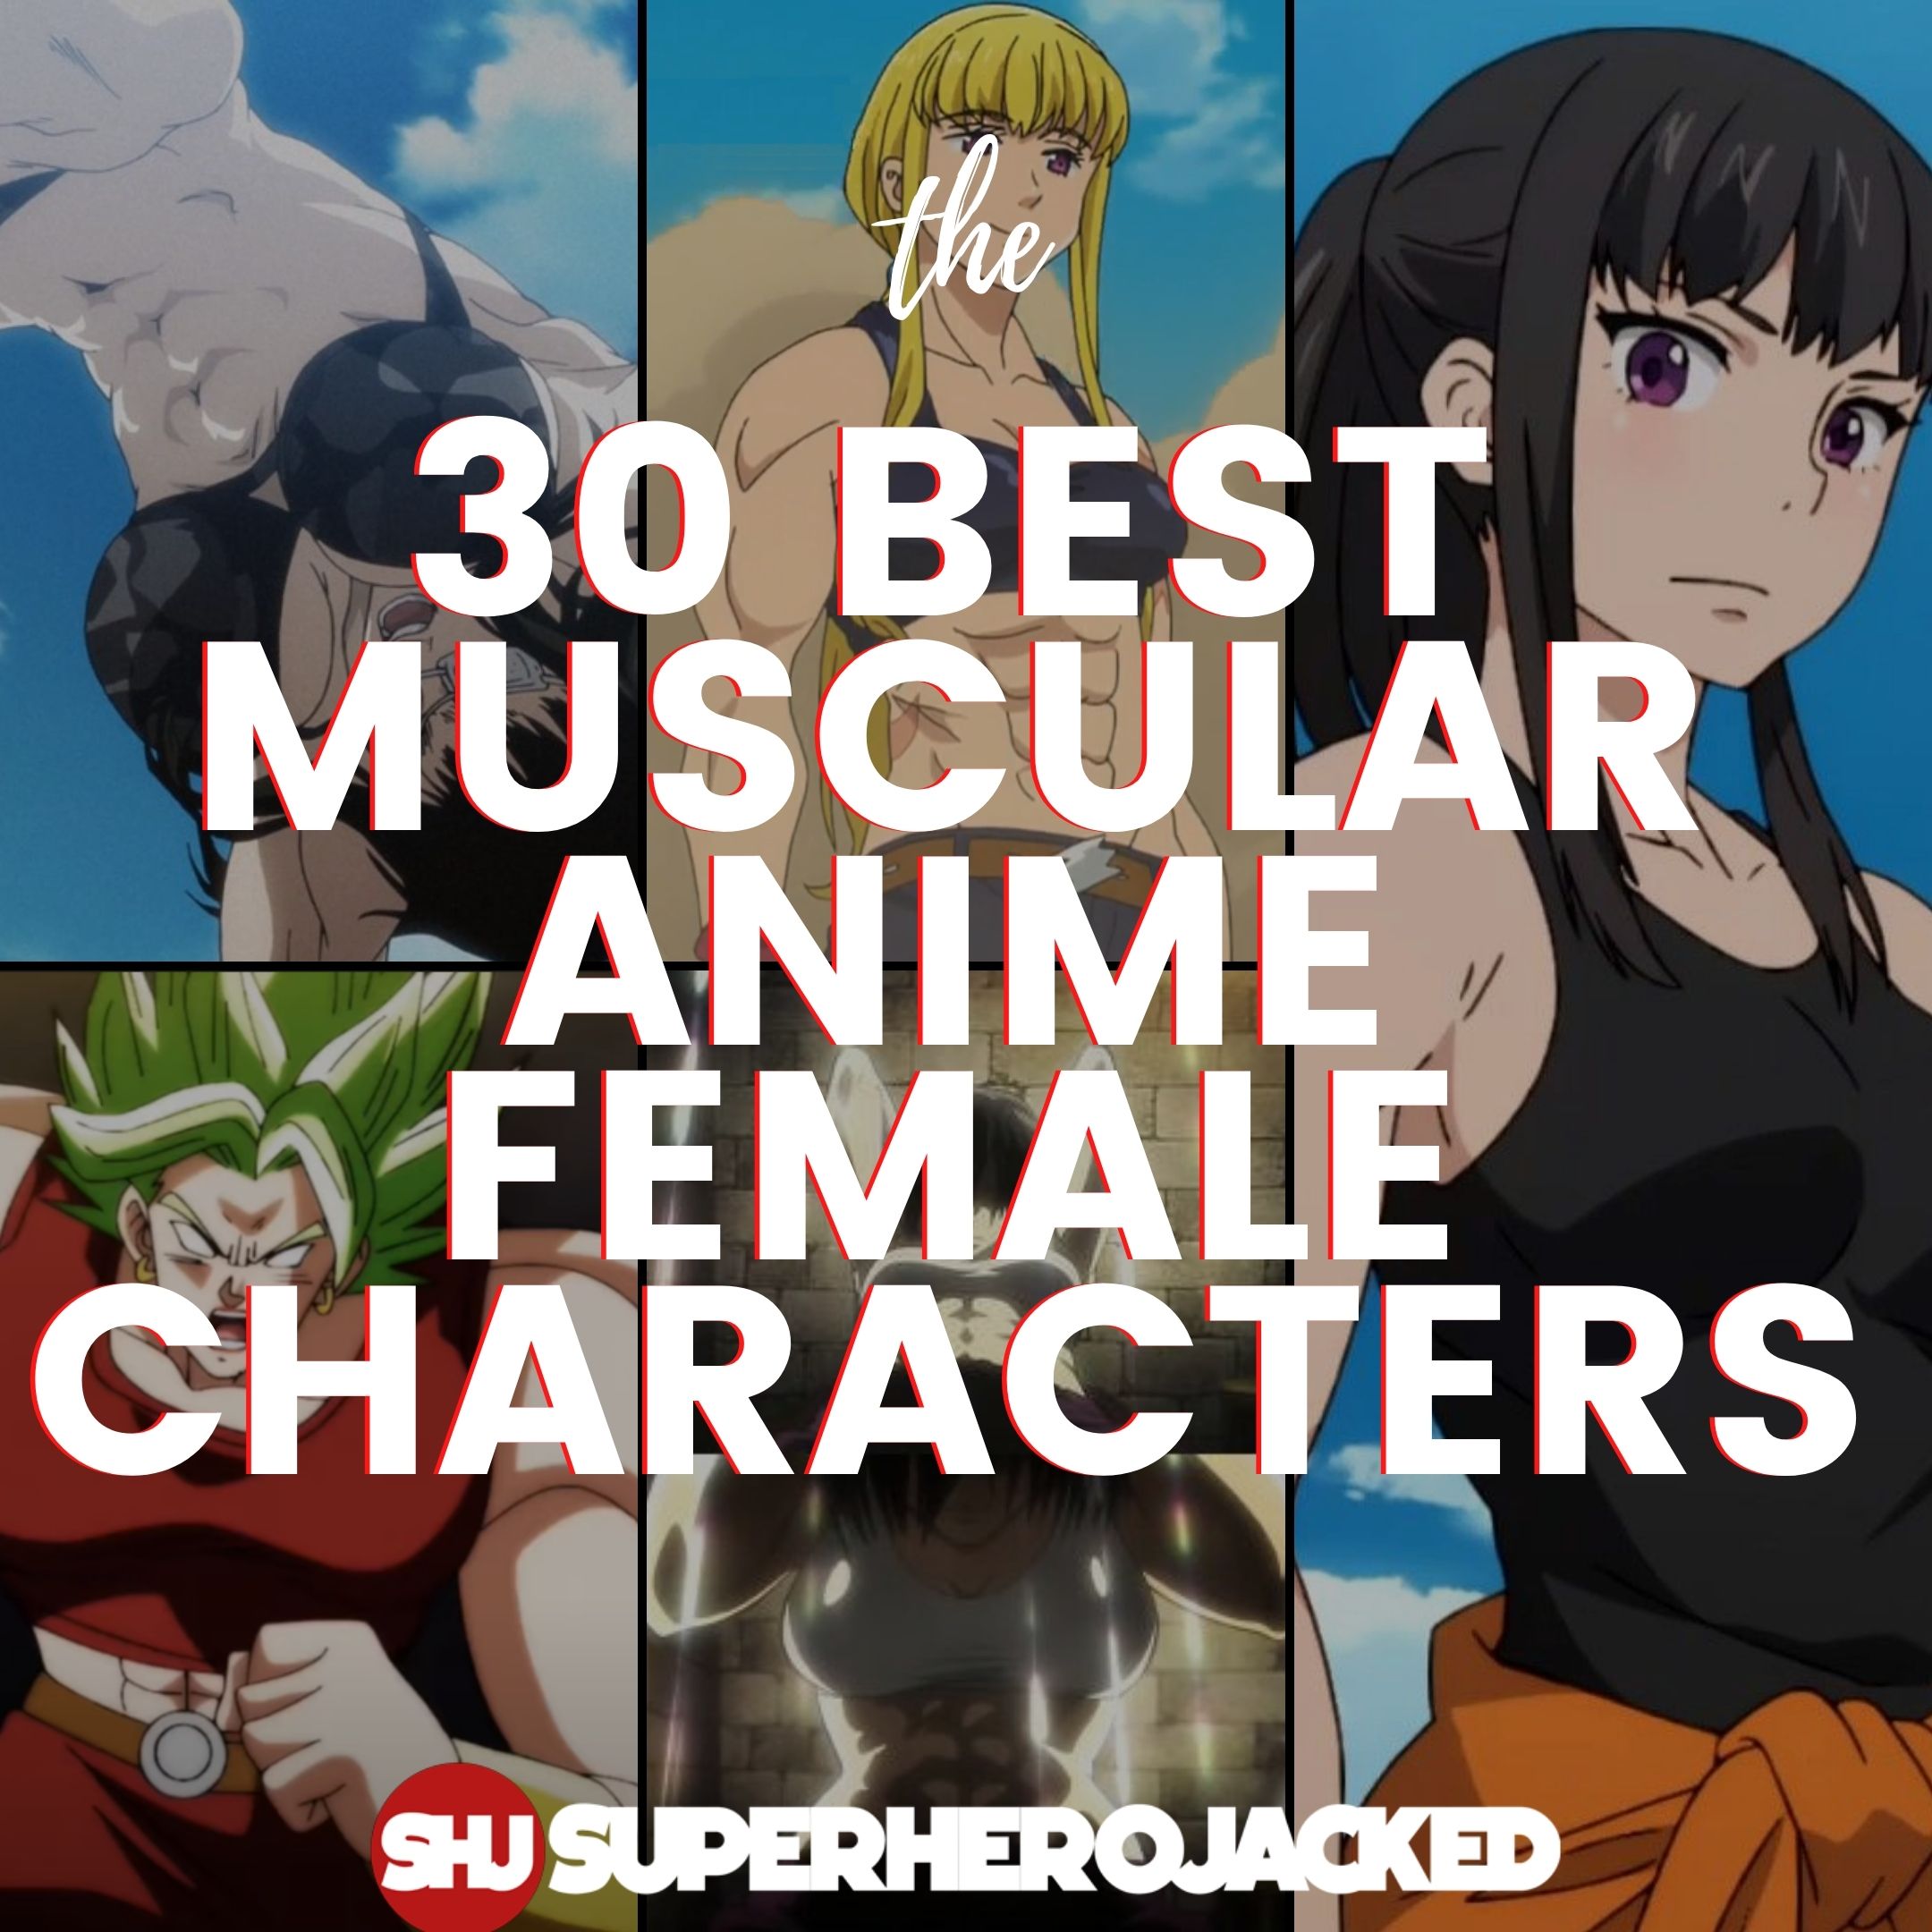 Muscular Anime Boy | Greeting Card, muscles anime - thirstymag.com